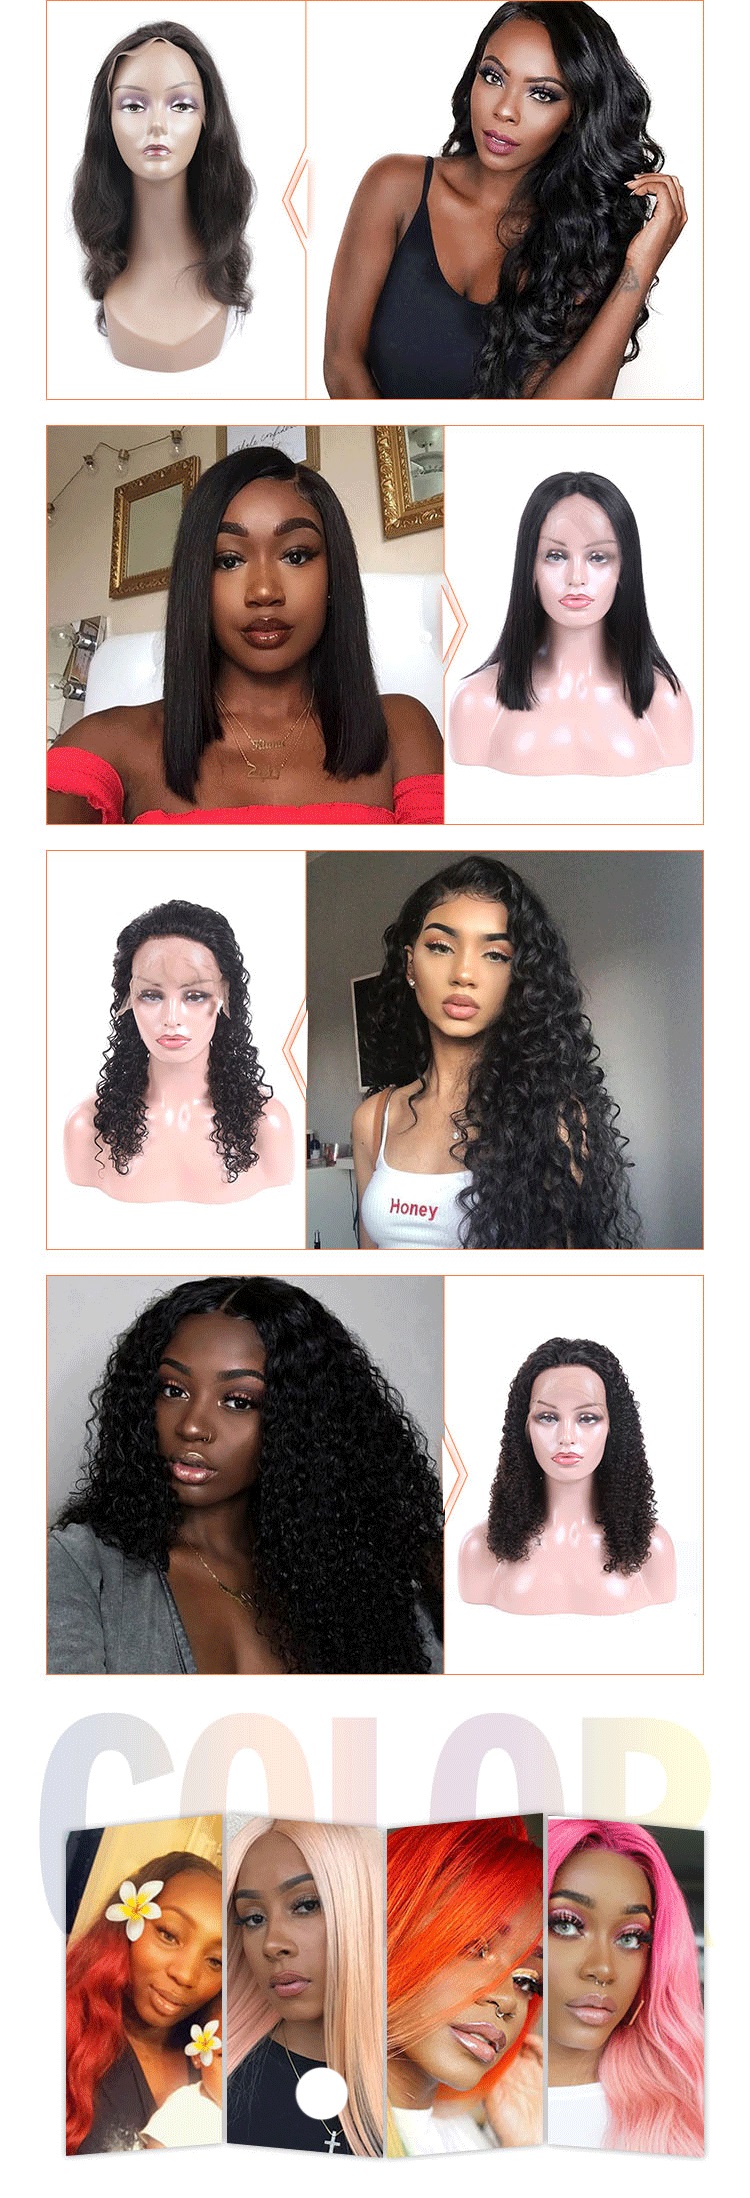 New Arrival 100 Percent Brazilian Human Hair Wigs,Curly Full Lace Virgin Remy 30 Inch Human Hair Wig